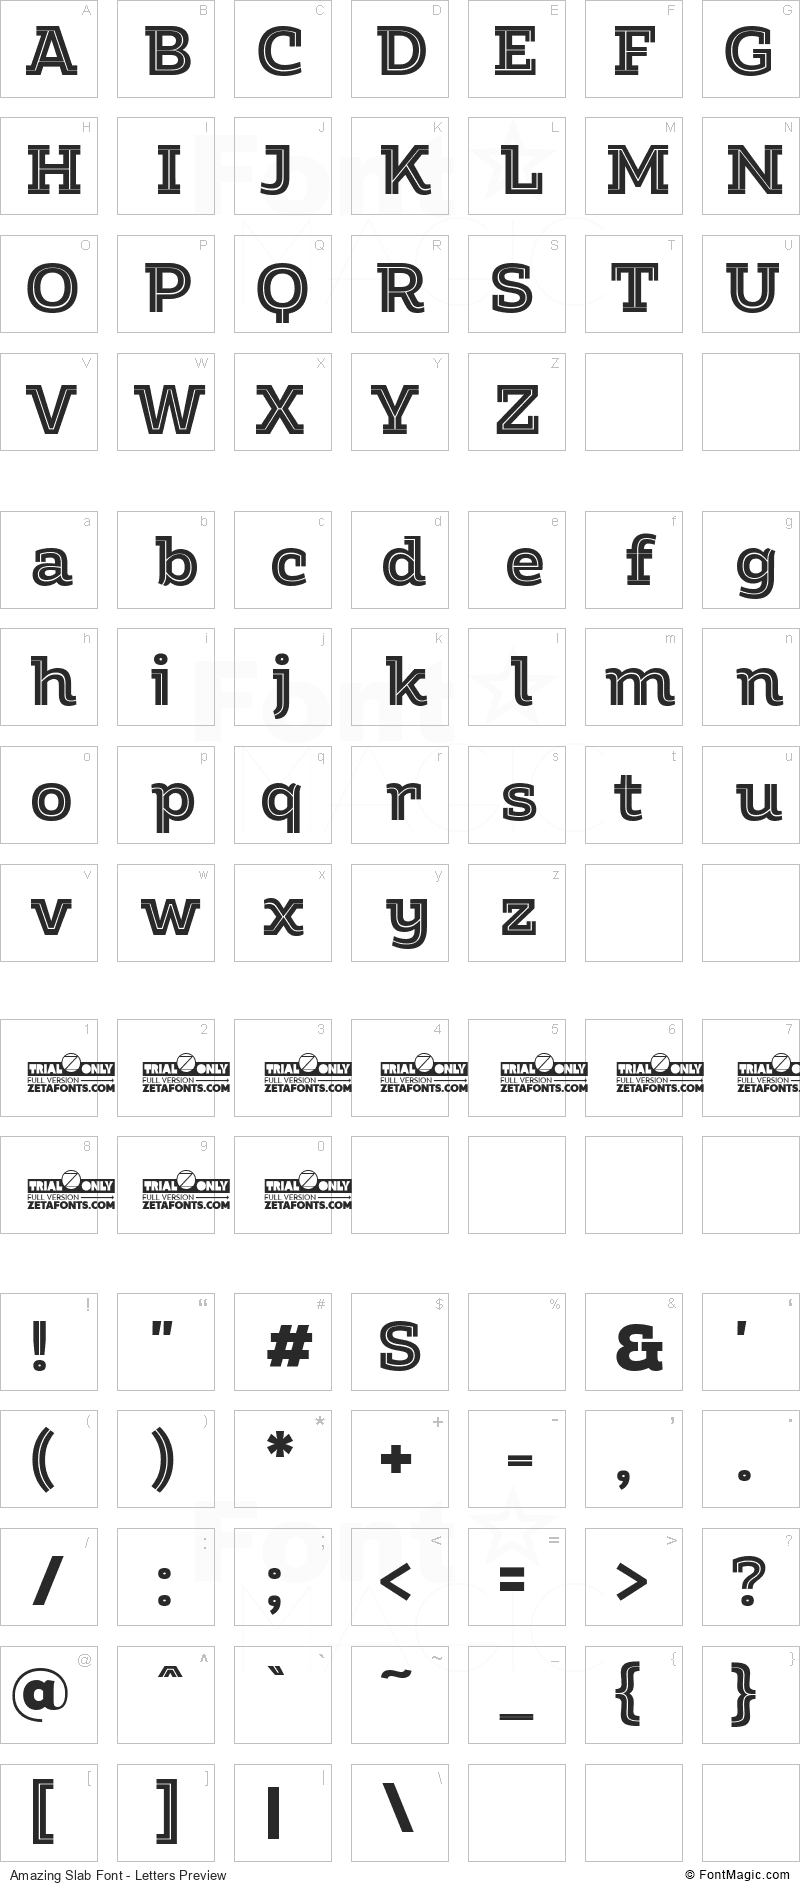 Amazing Slab Font - All Latters Preview Chart